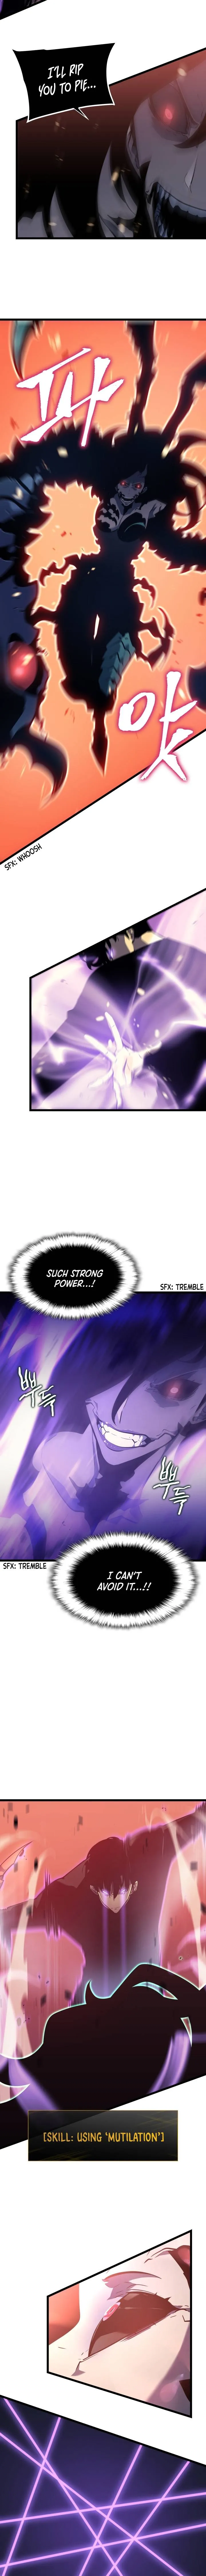 Solo leveling Chapter 160 18